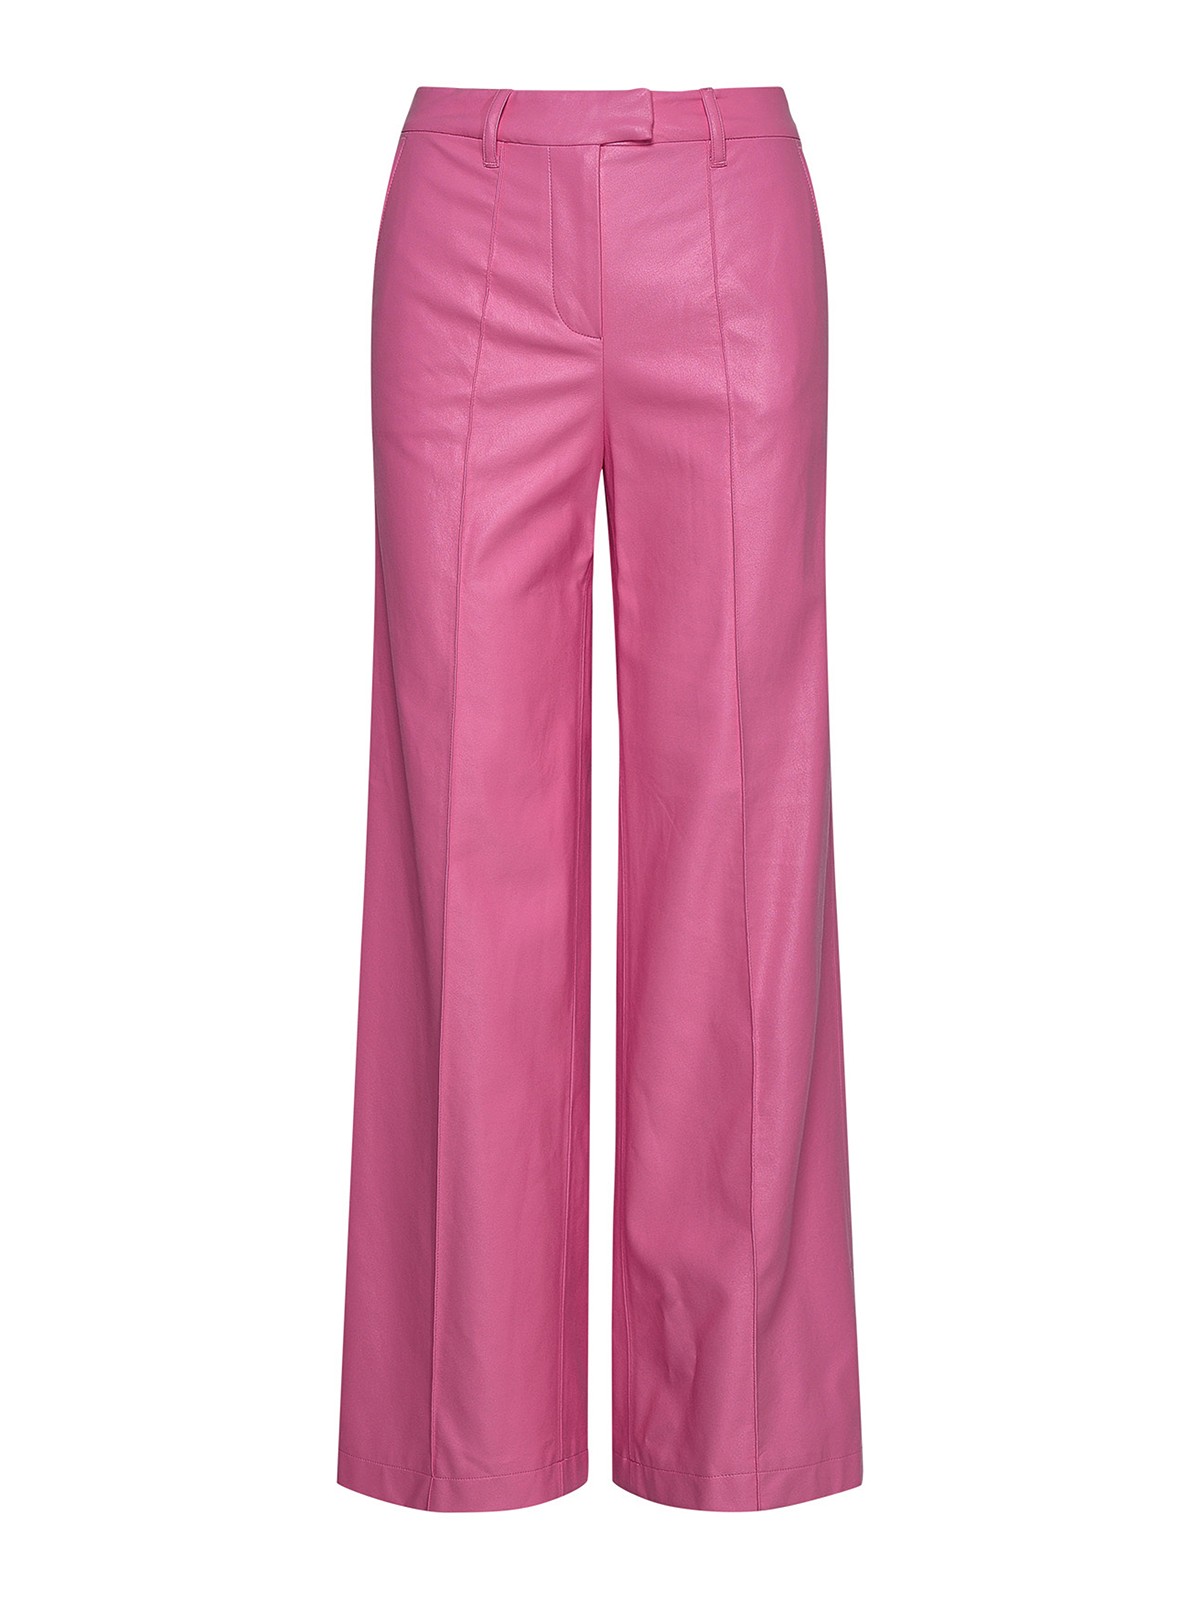 Stand Studio Mabel Trousers In Pink Polyurethane Blend In Nude & Neutrals